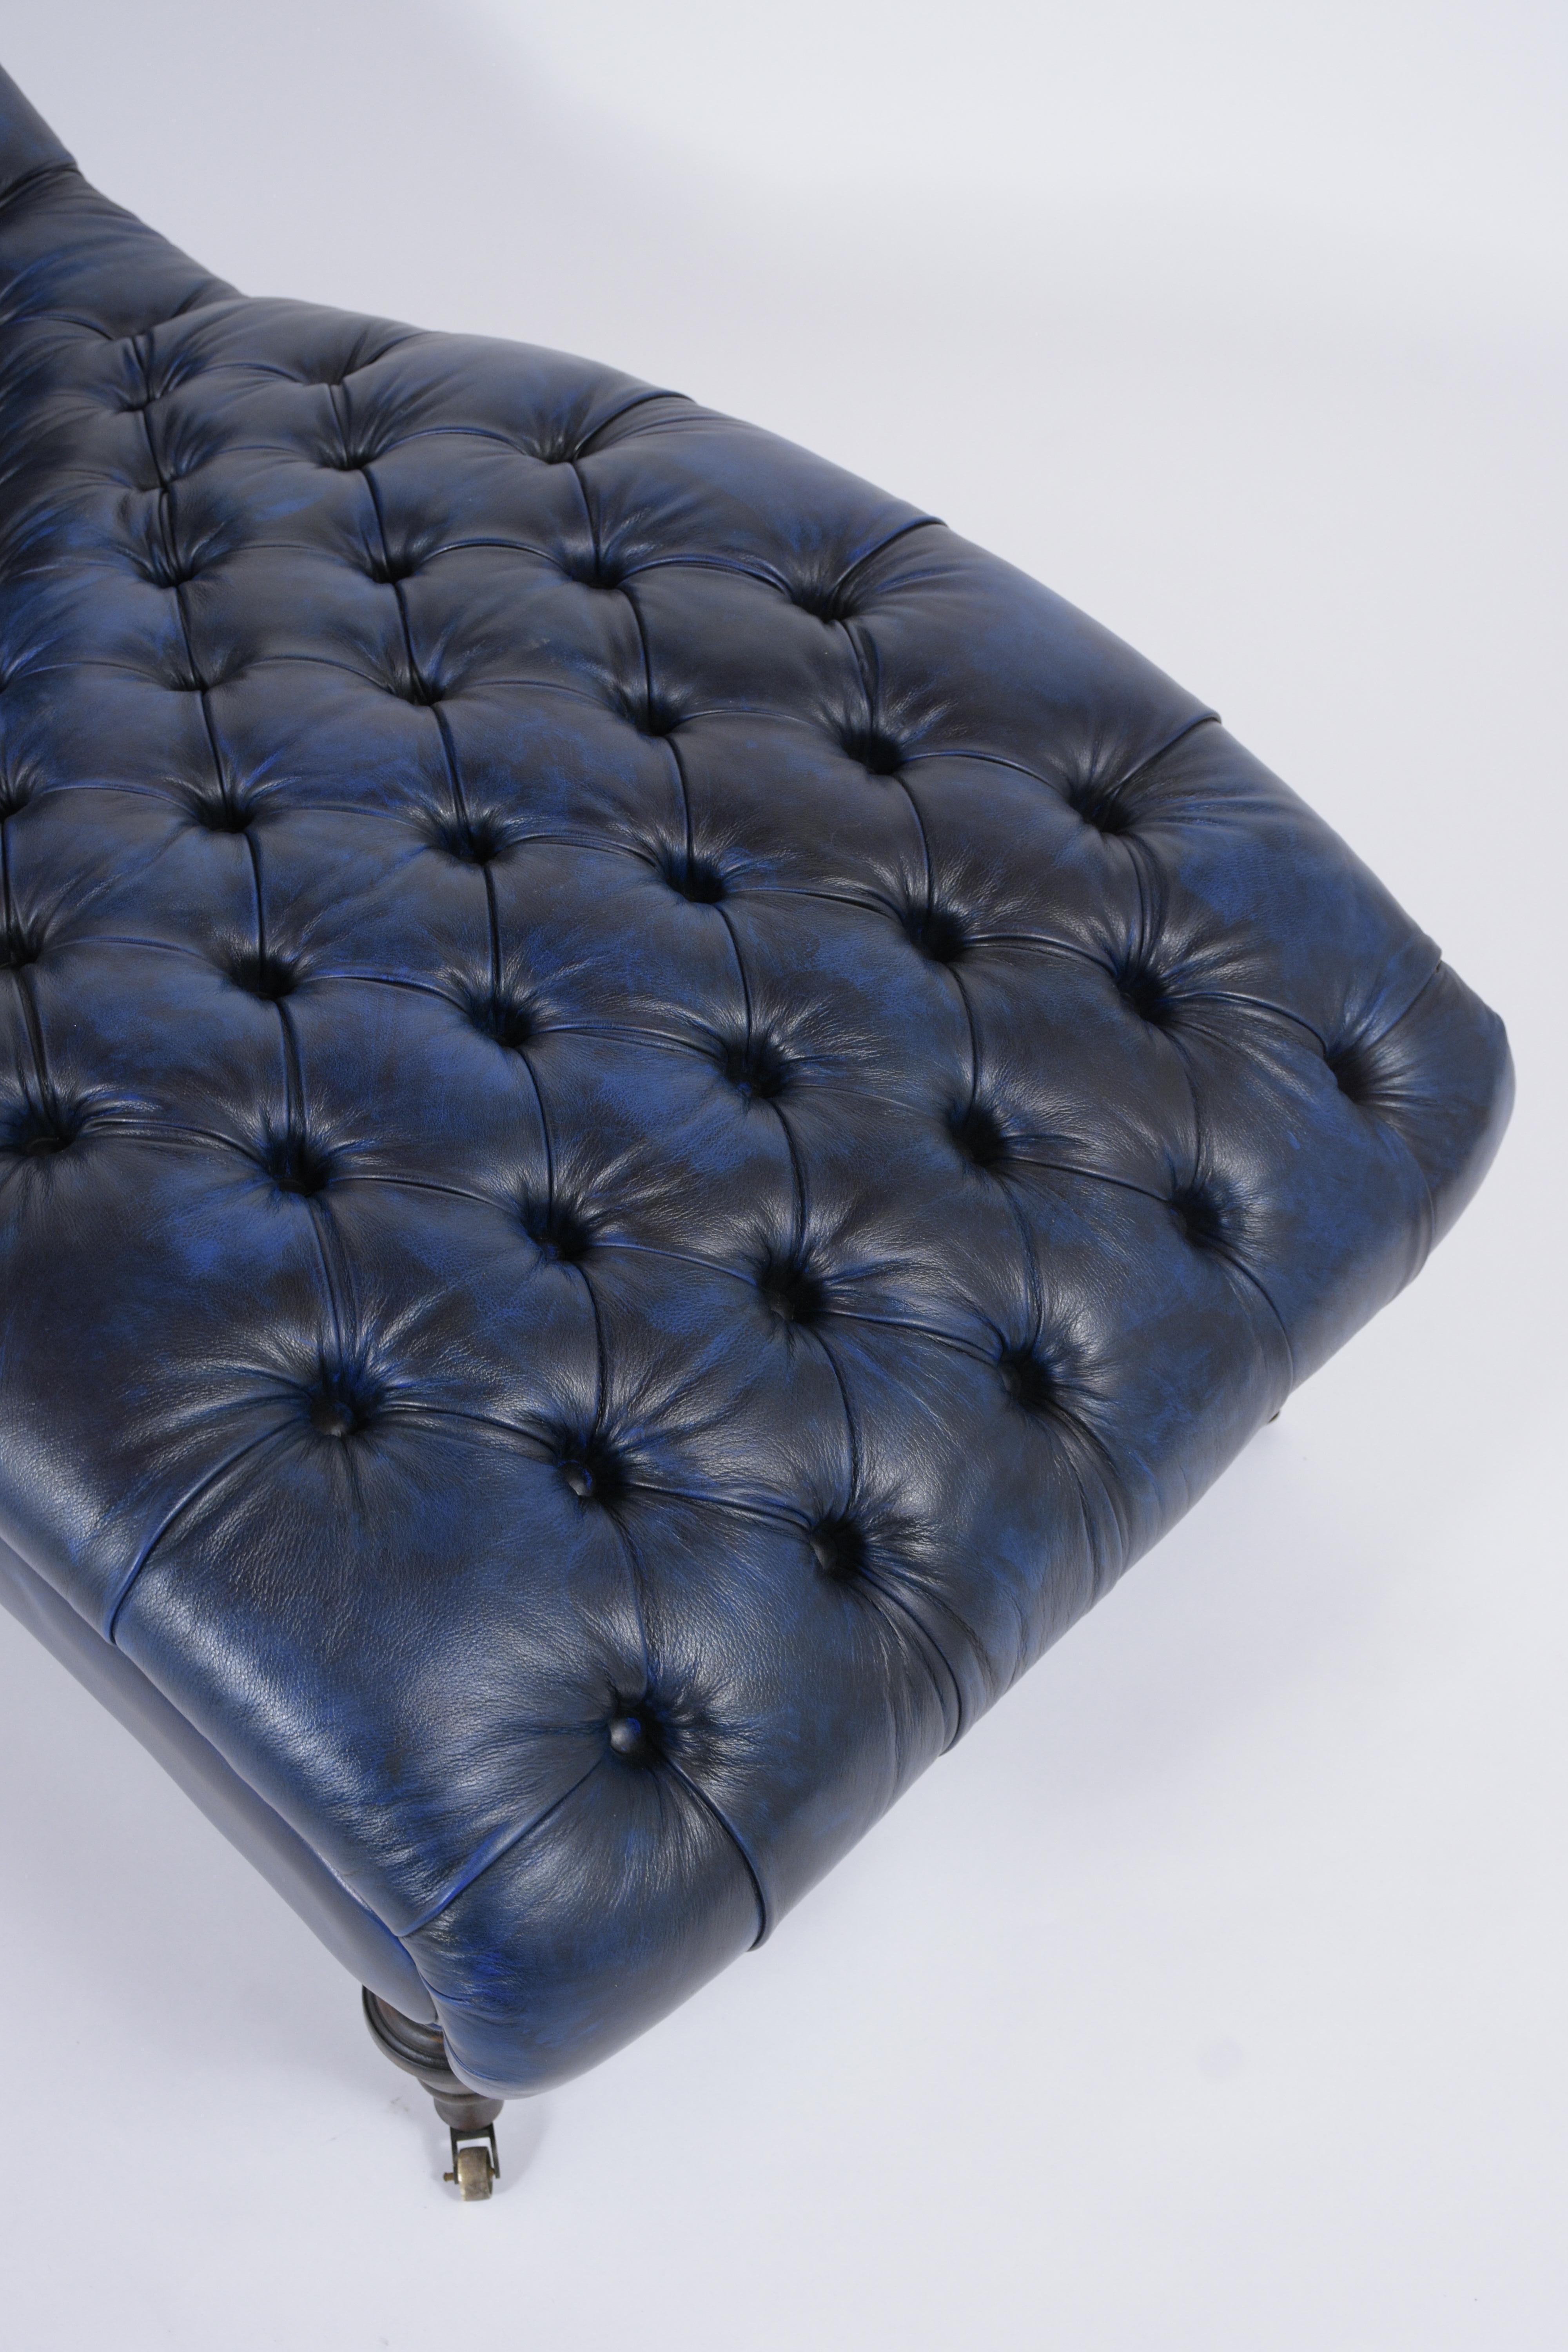 American Tufted Chaise Lounge